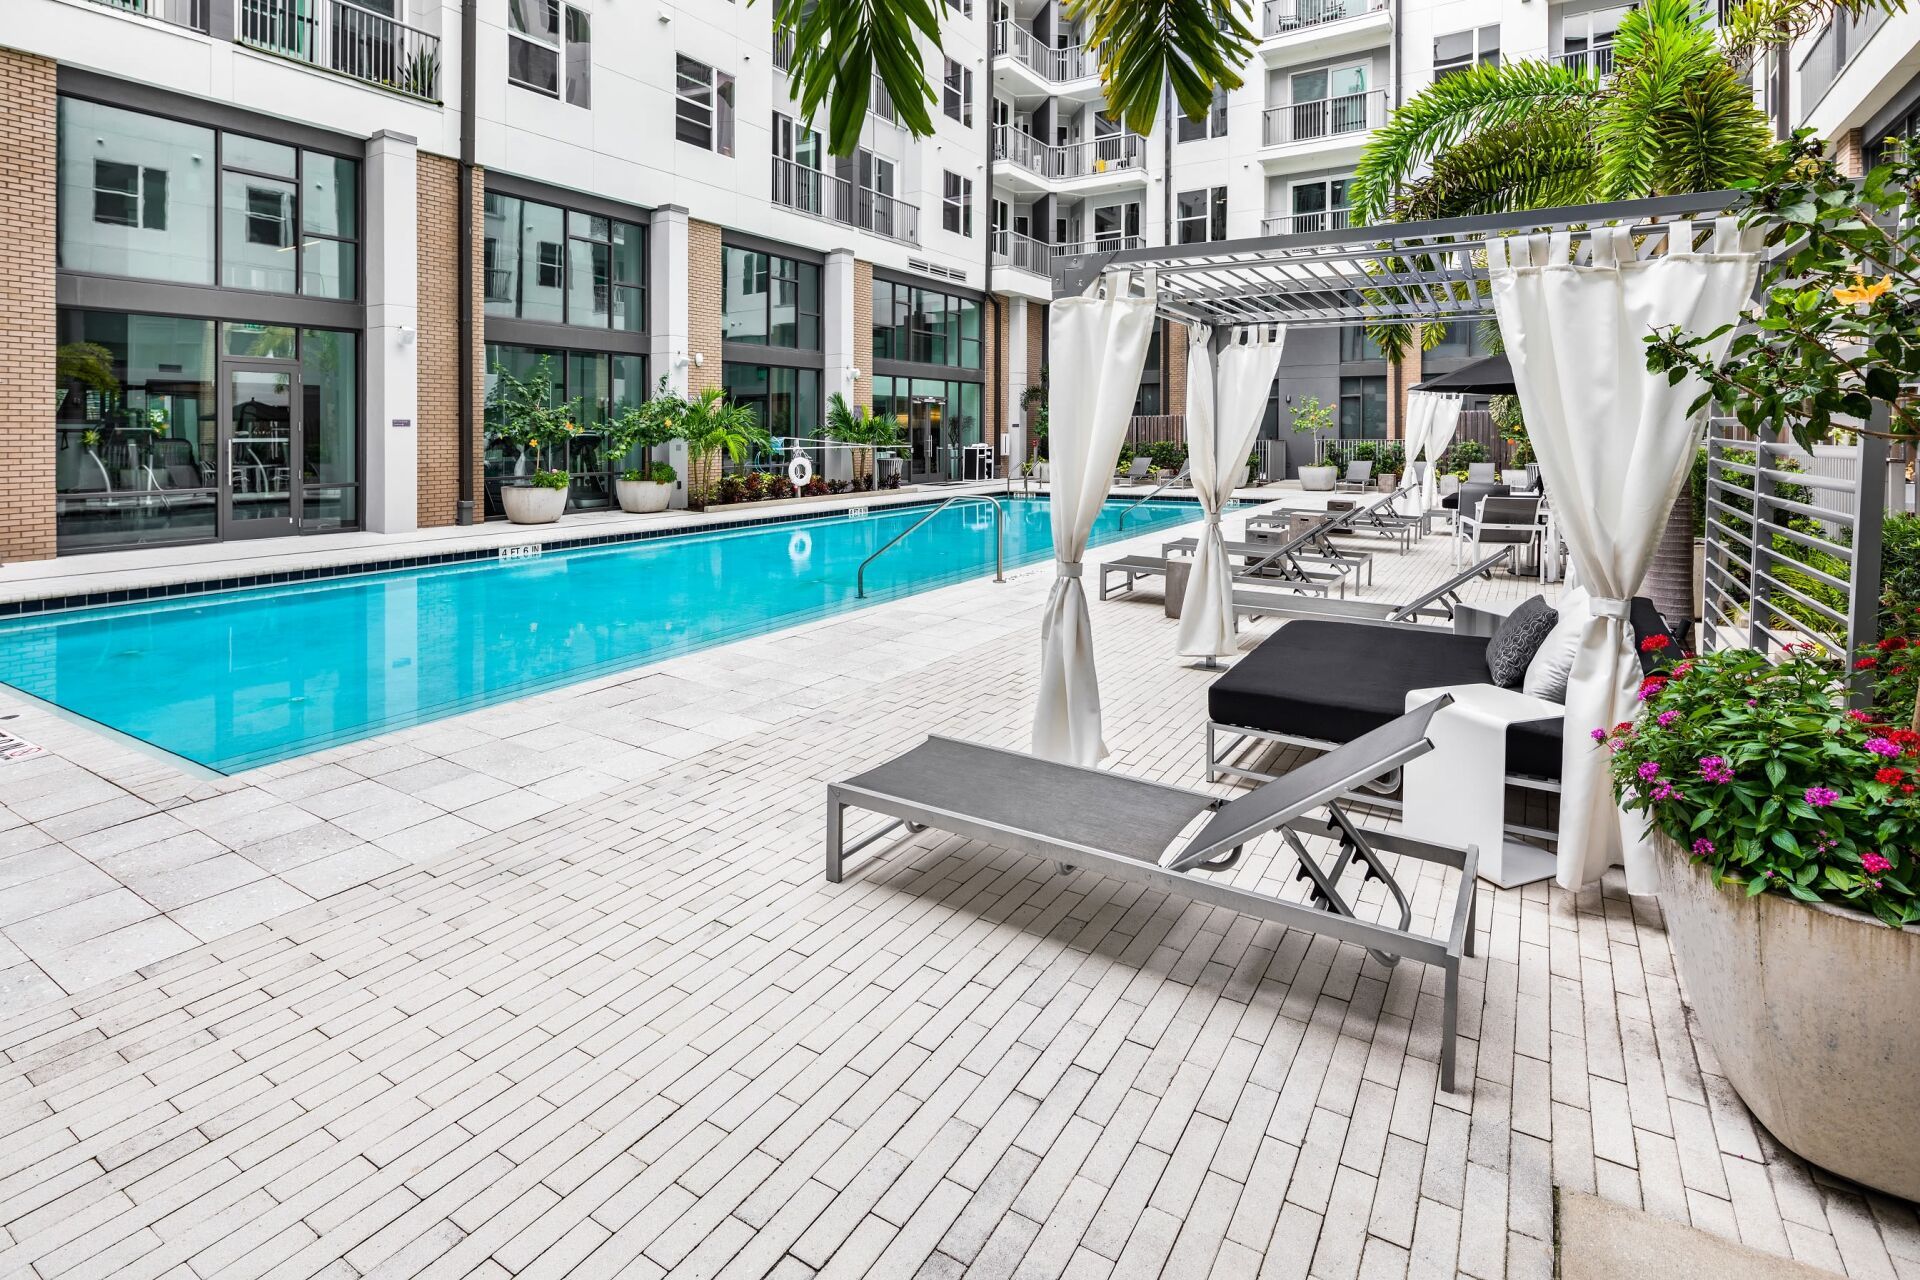 Central Station on Orange | Apartment Pool with Poolside Lounge